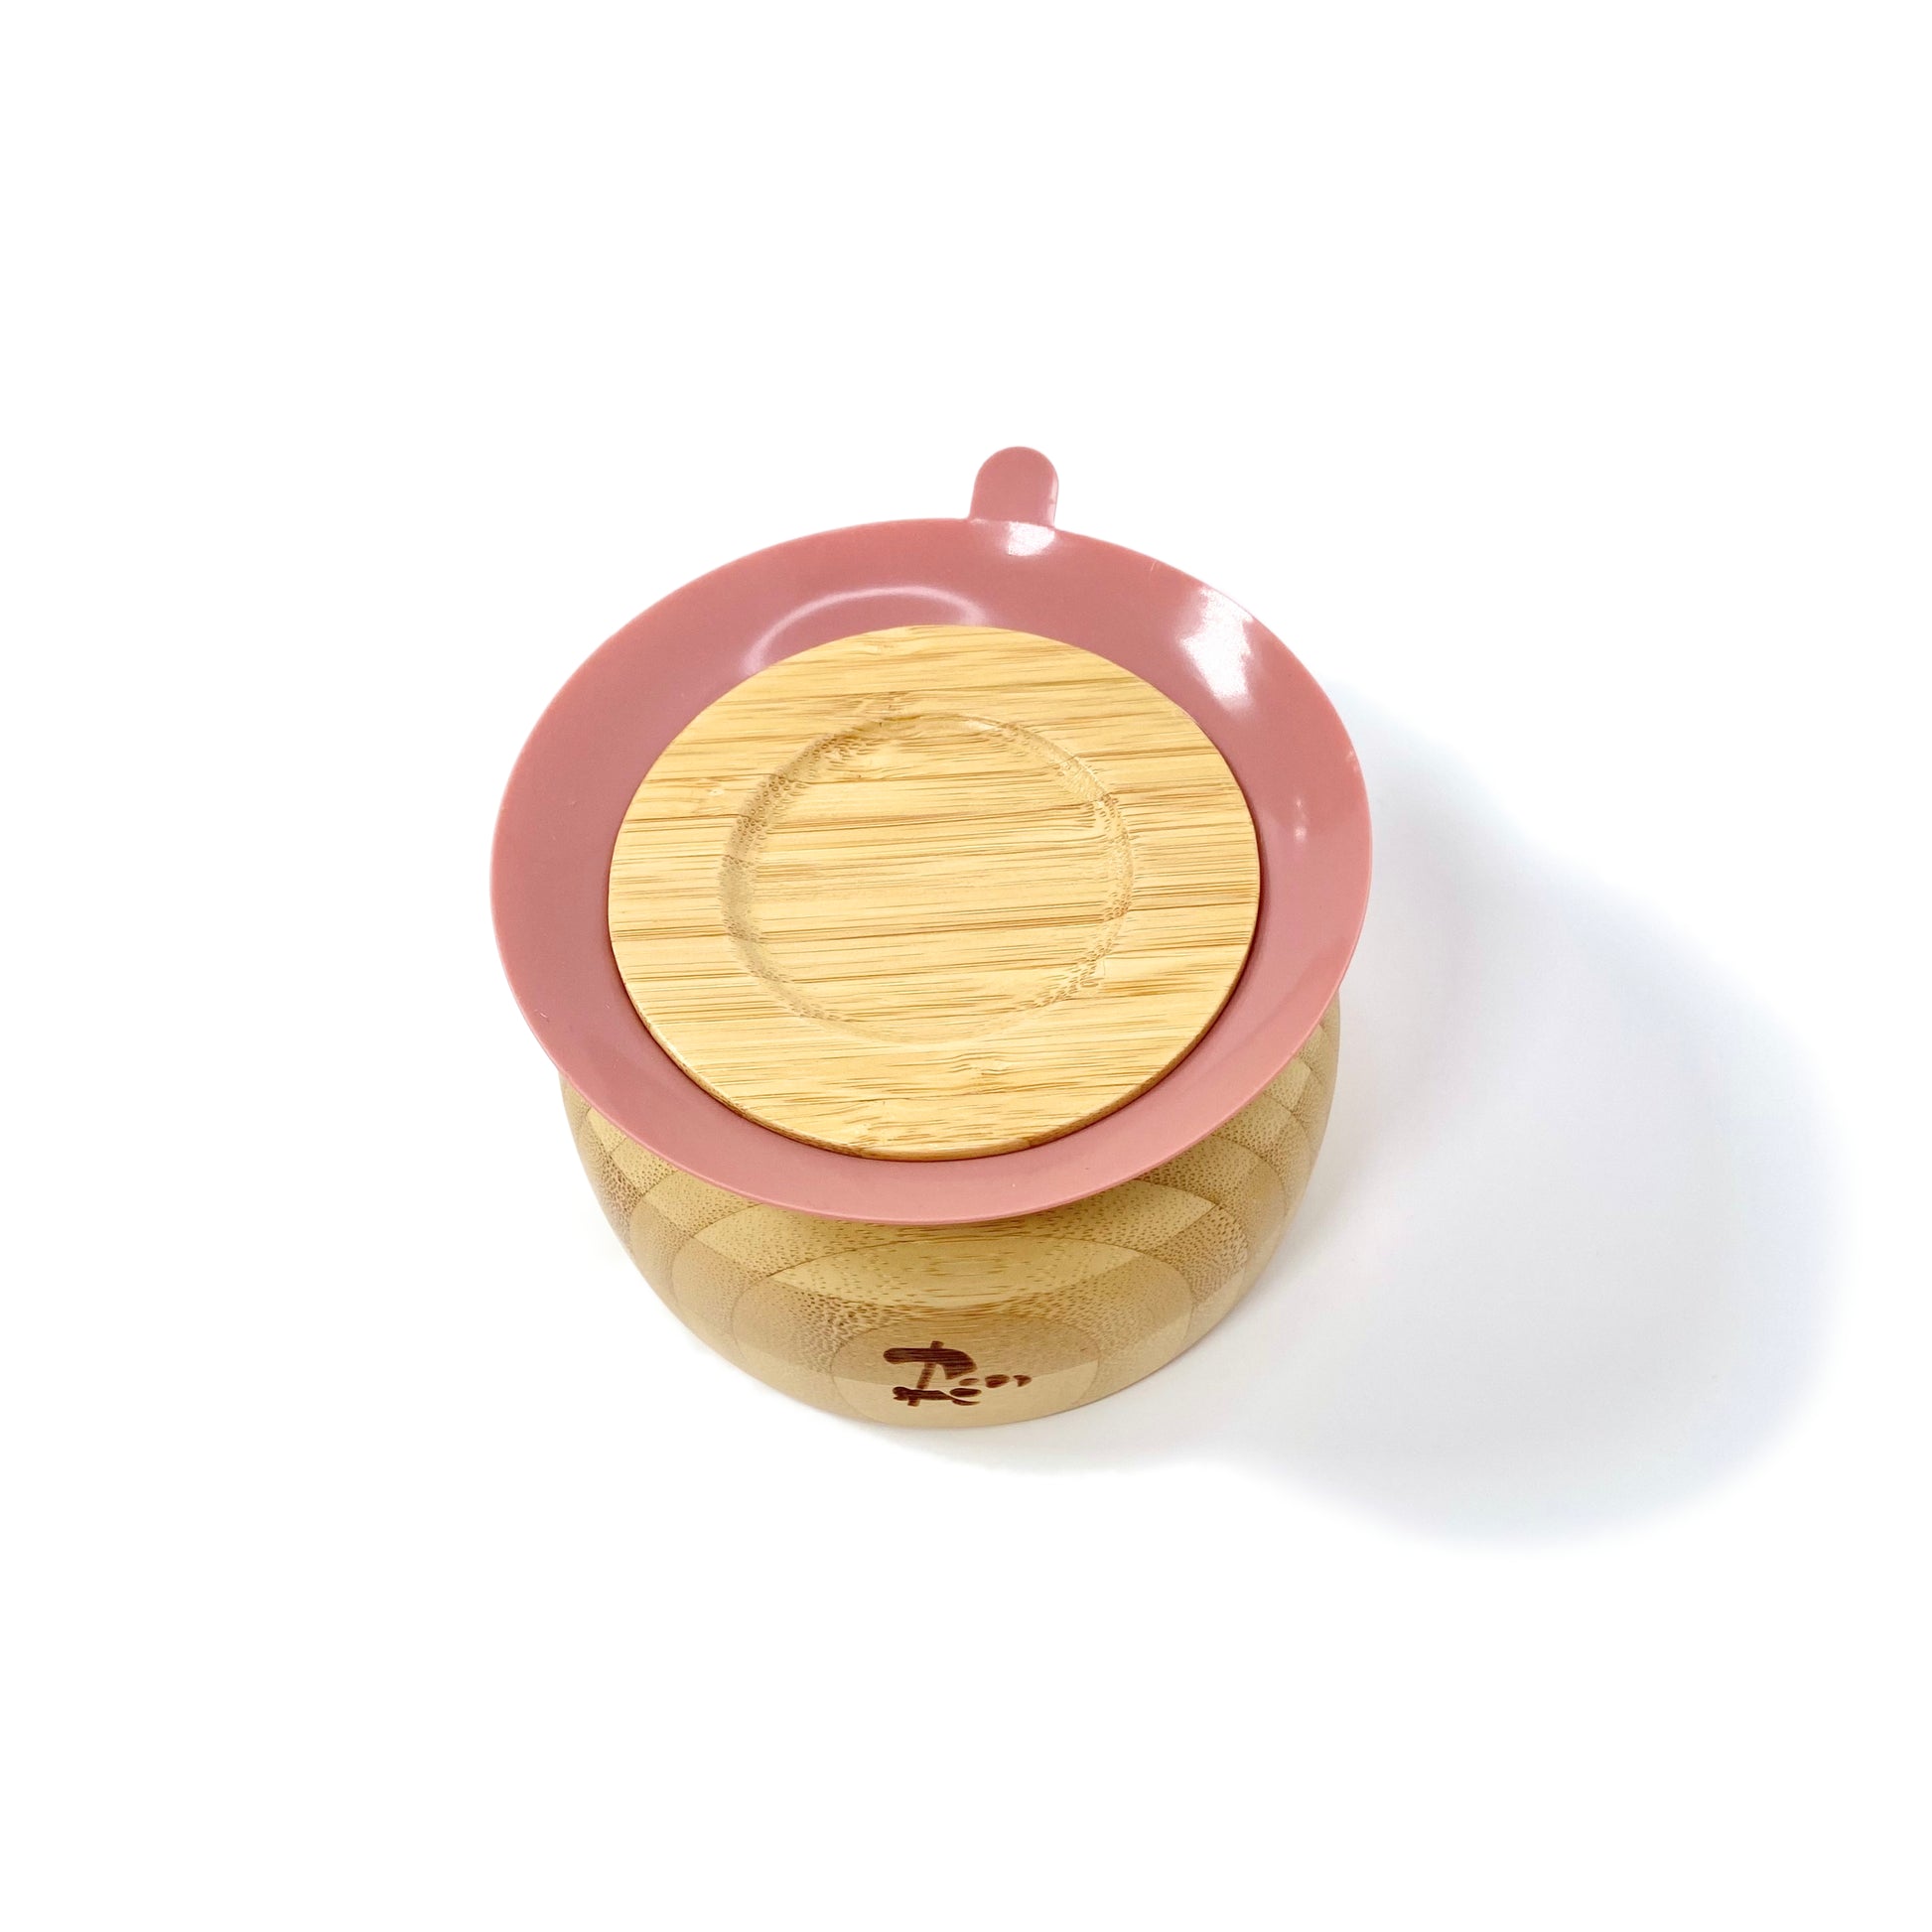 A children’s bamboo bowl with a pink blush silicone suction ring. Image shows the underside of the bowl, featuring the silicone suction ring.